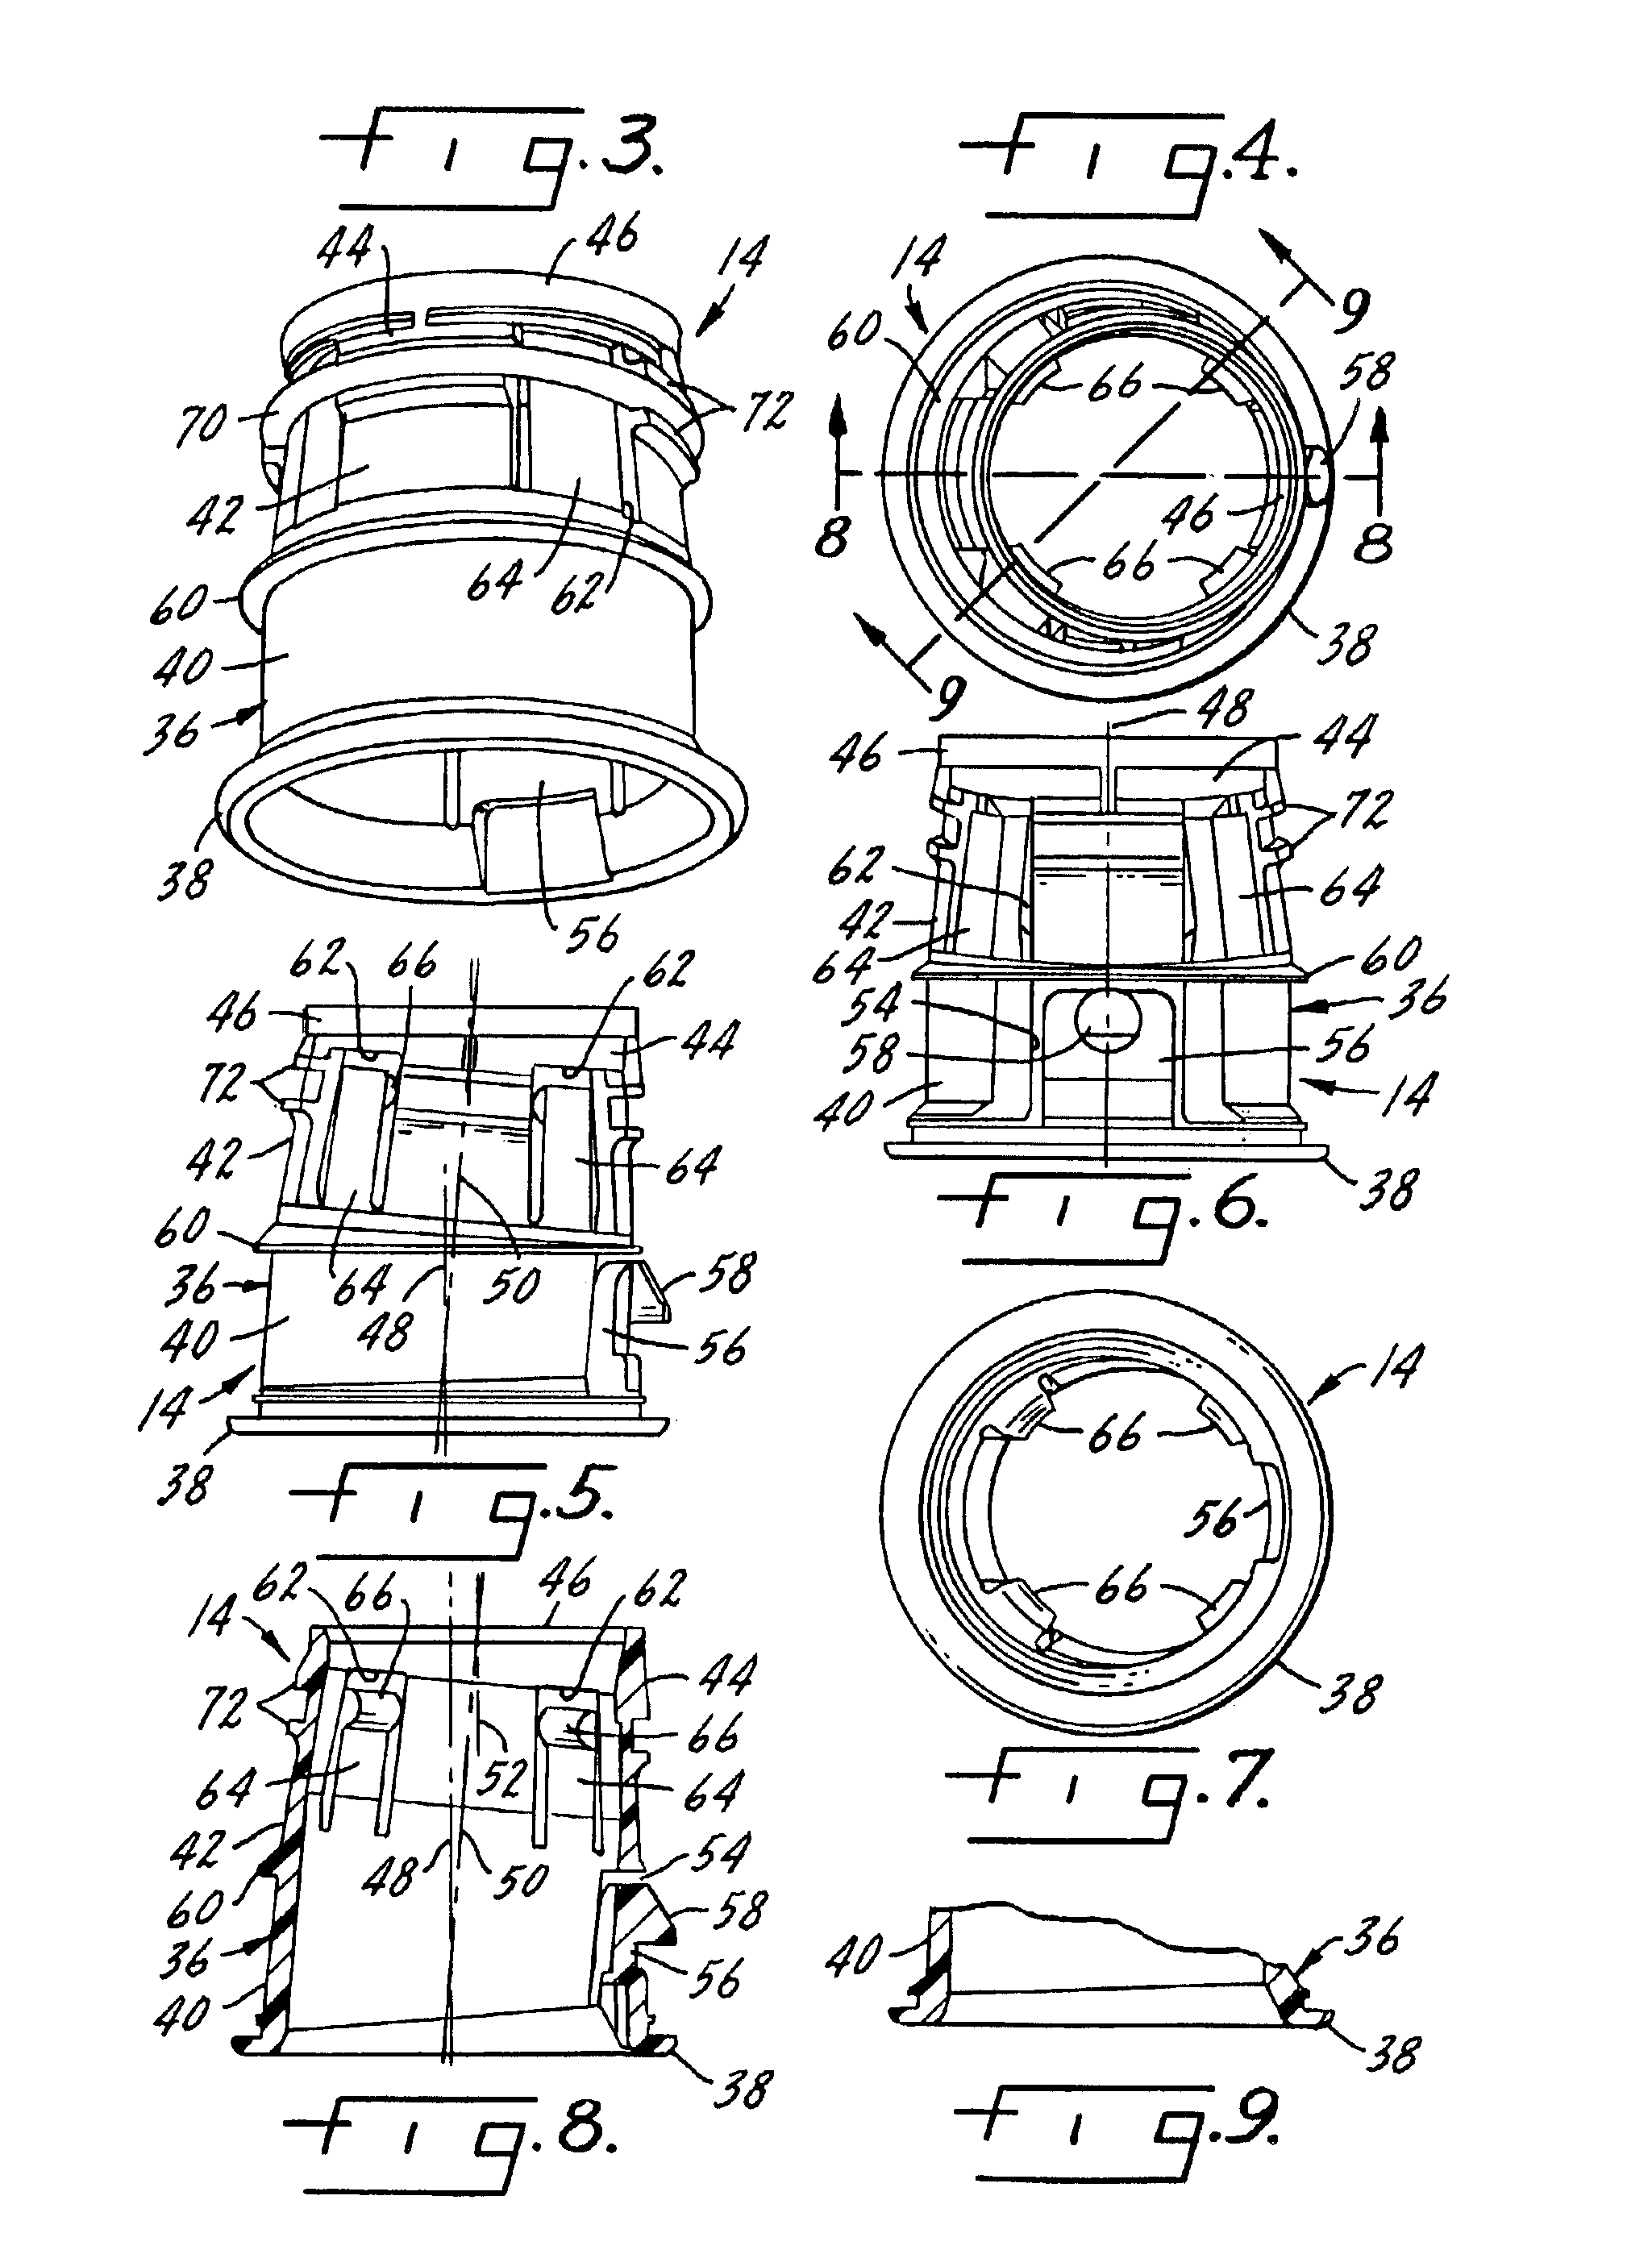 Docking collar for a faucet having a pullout spray head